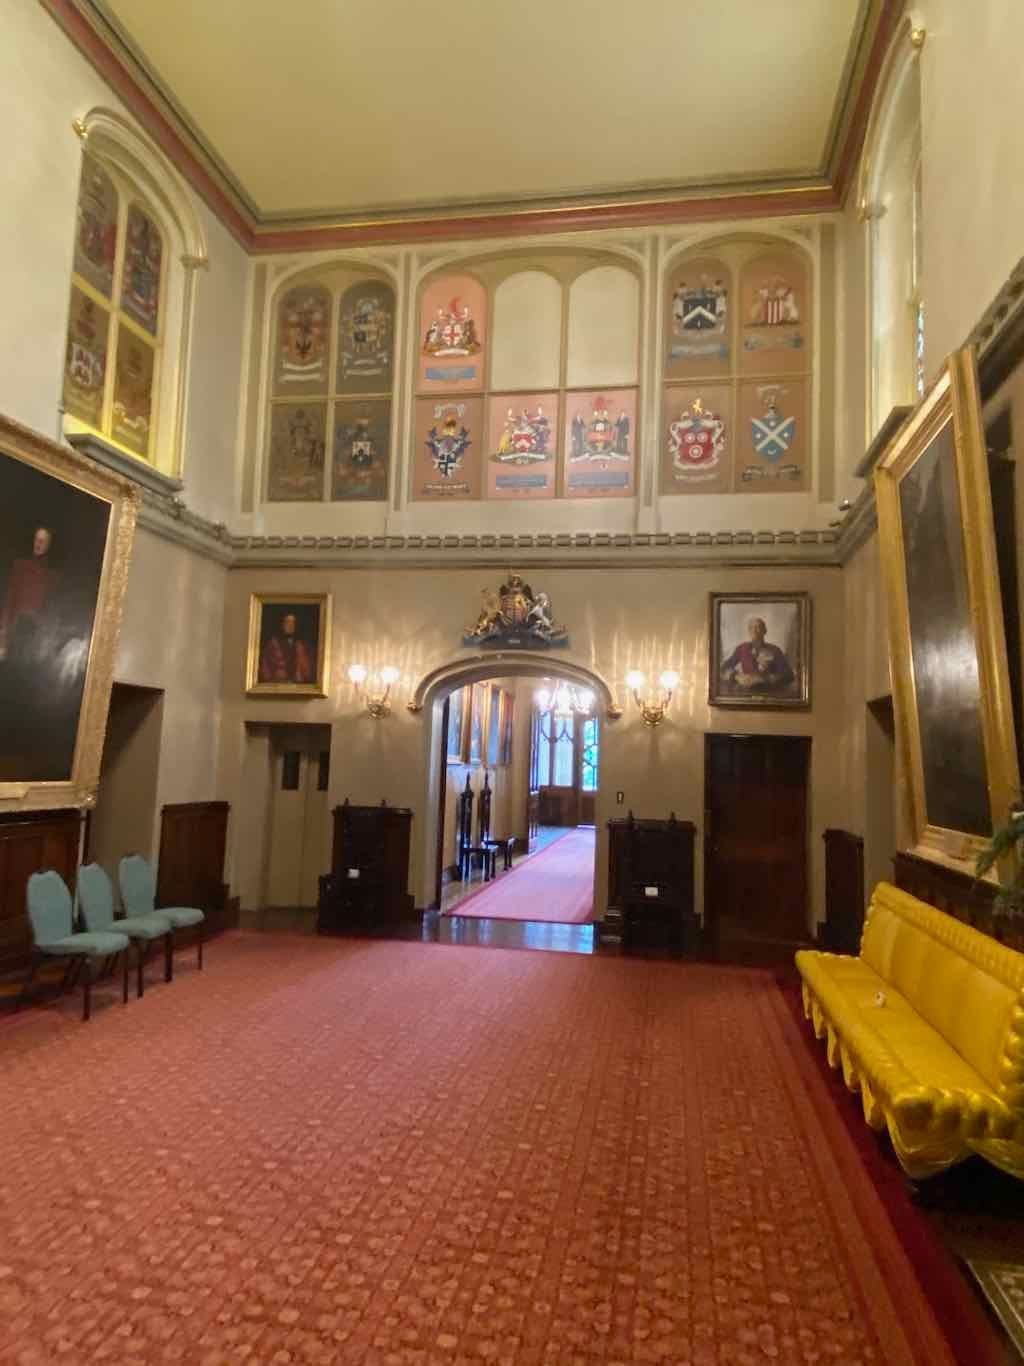 Government House + High Tea at Parliament House - December 2022 Public Day Tour Image -639c13b973010